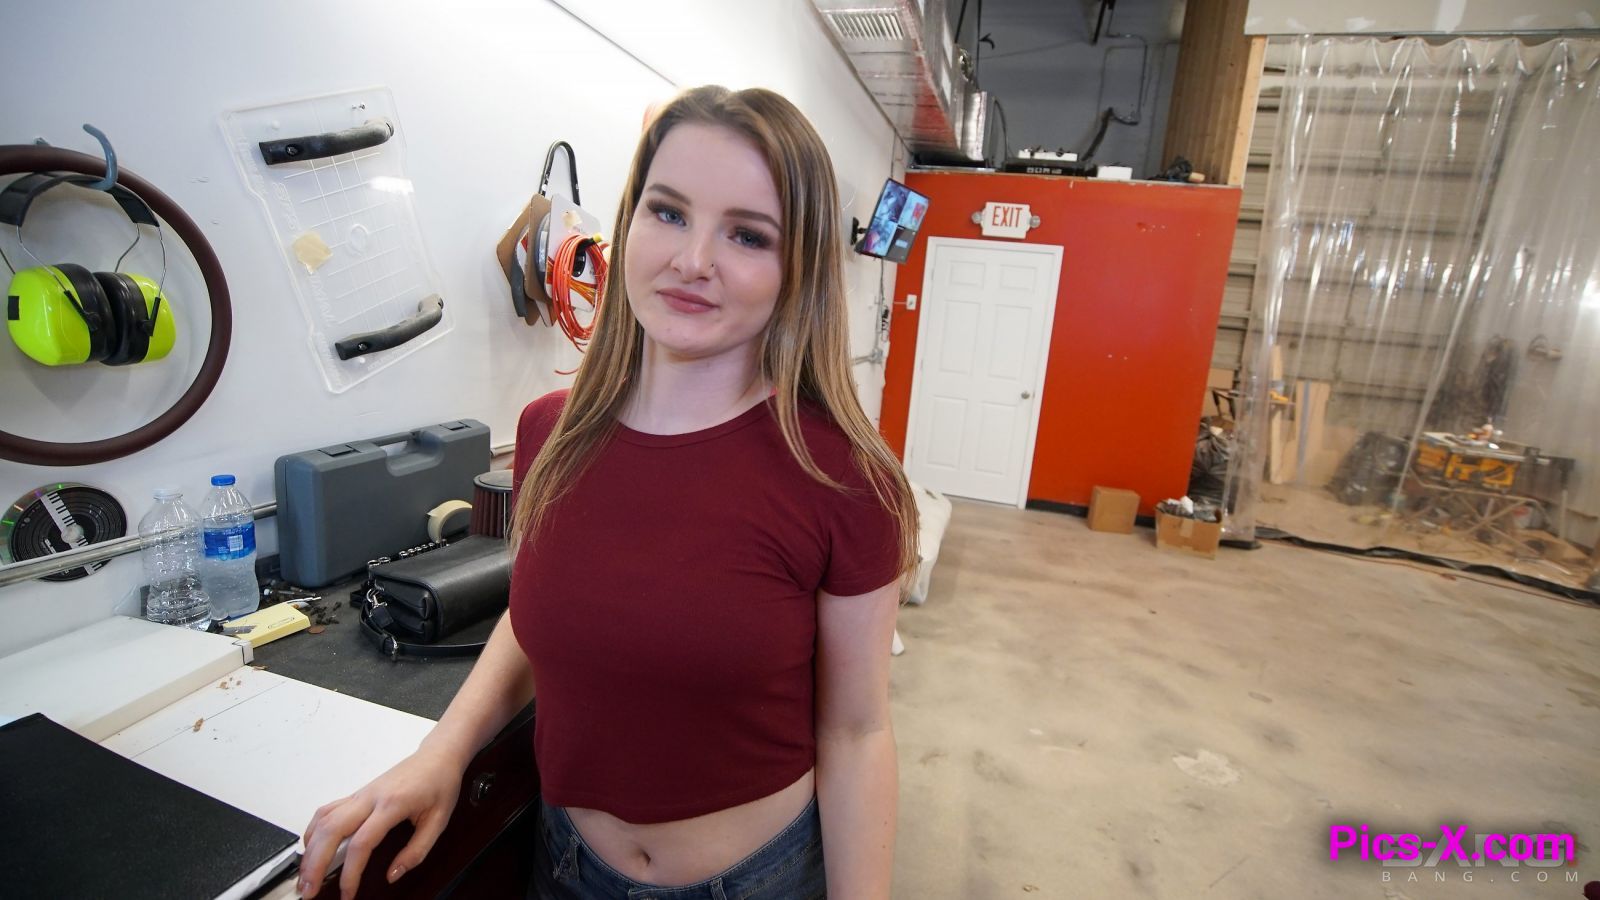 Eliza Eves owes too much for the bill but fucks the mechanic good instead - Image 1